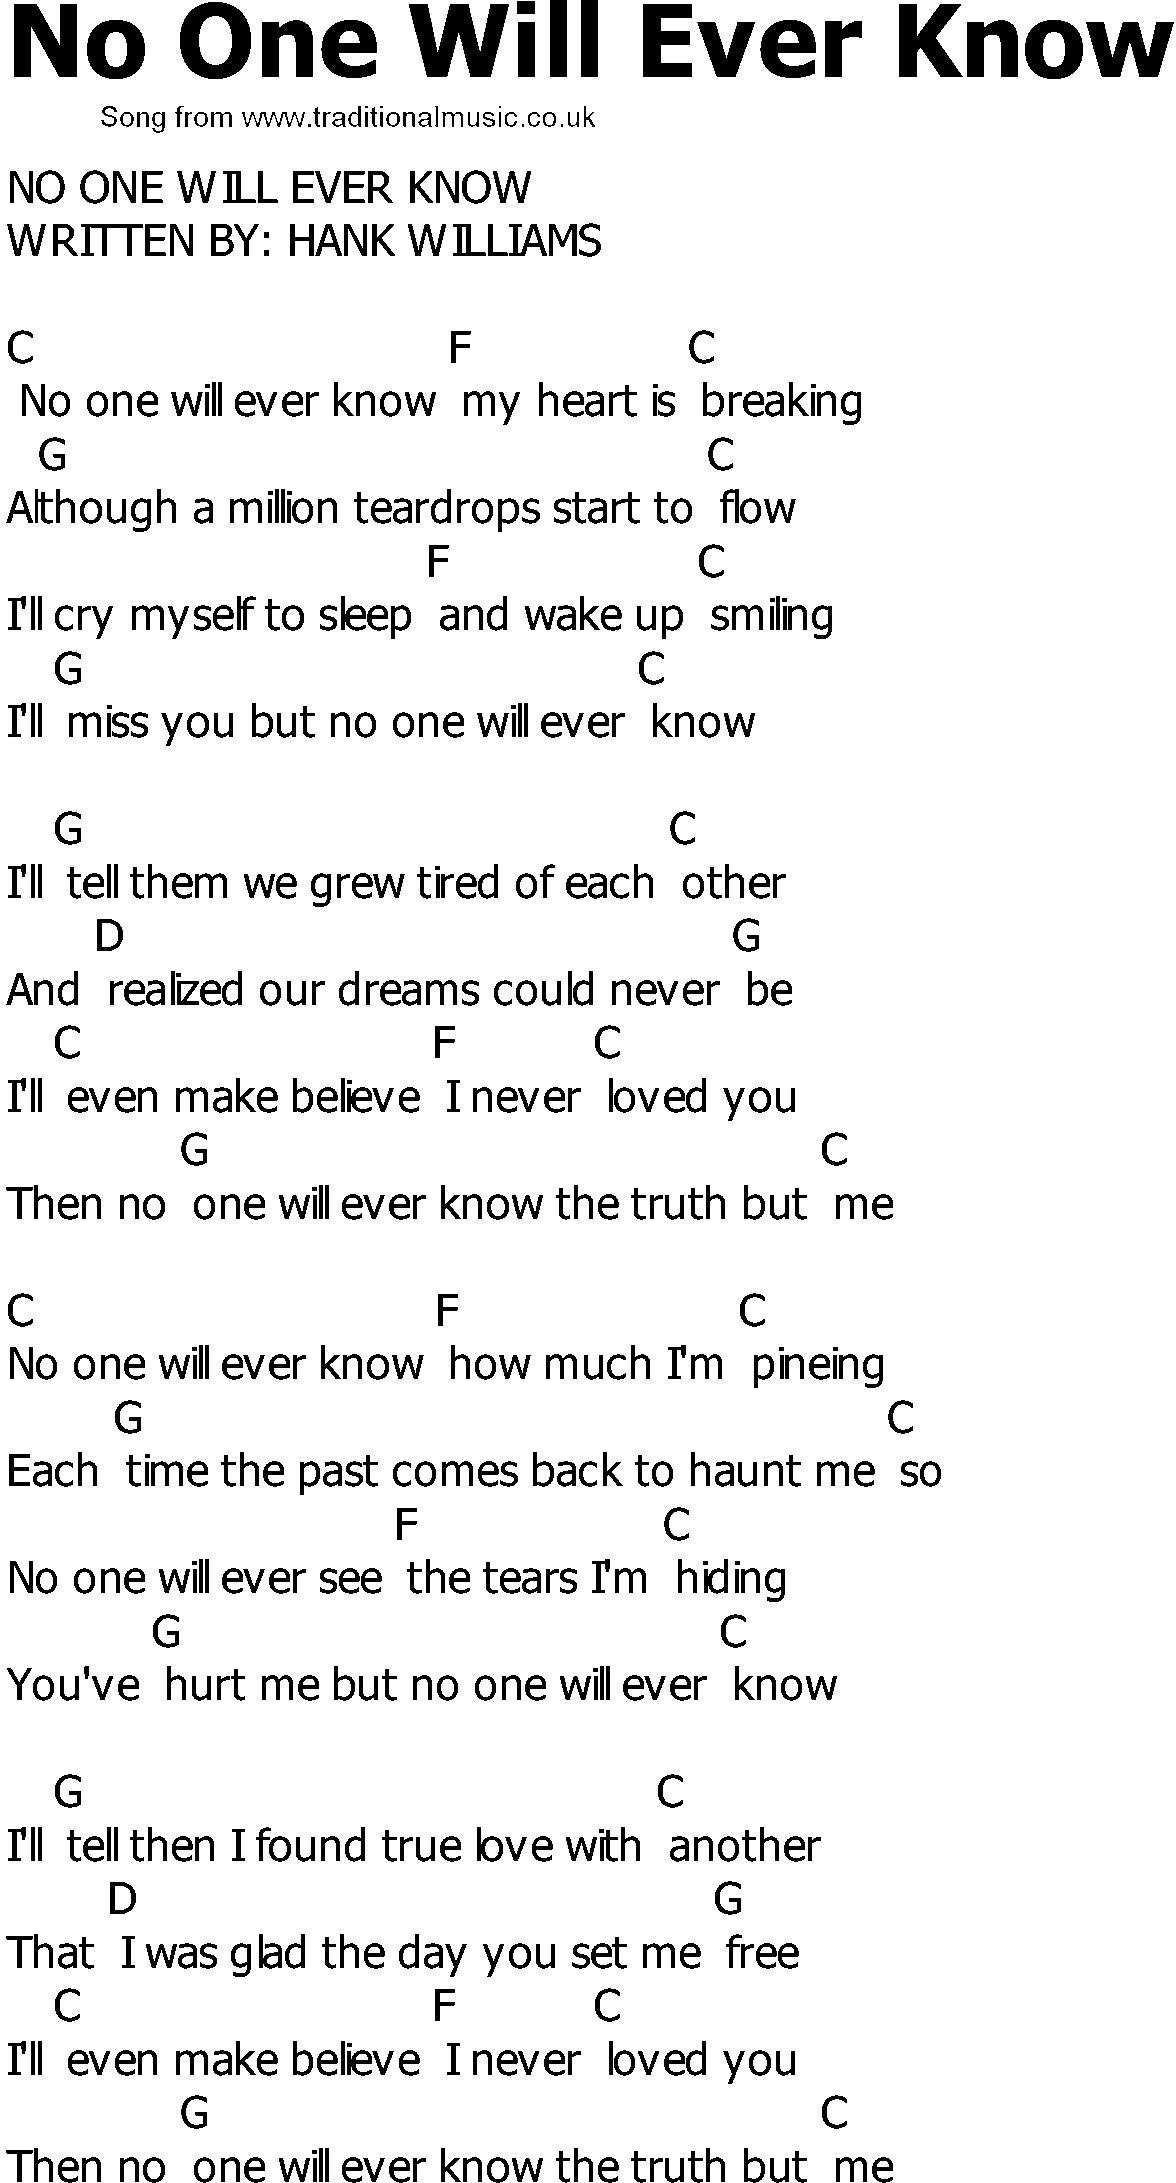 Old Country song lyrics with chords - No One Will Ever Know